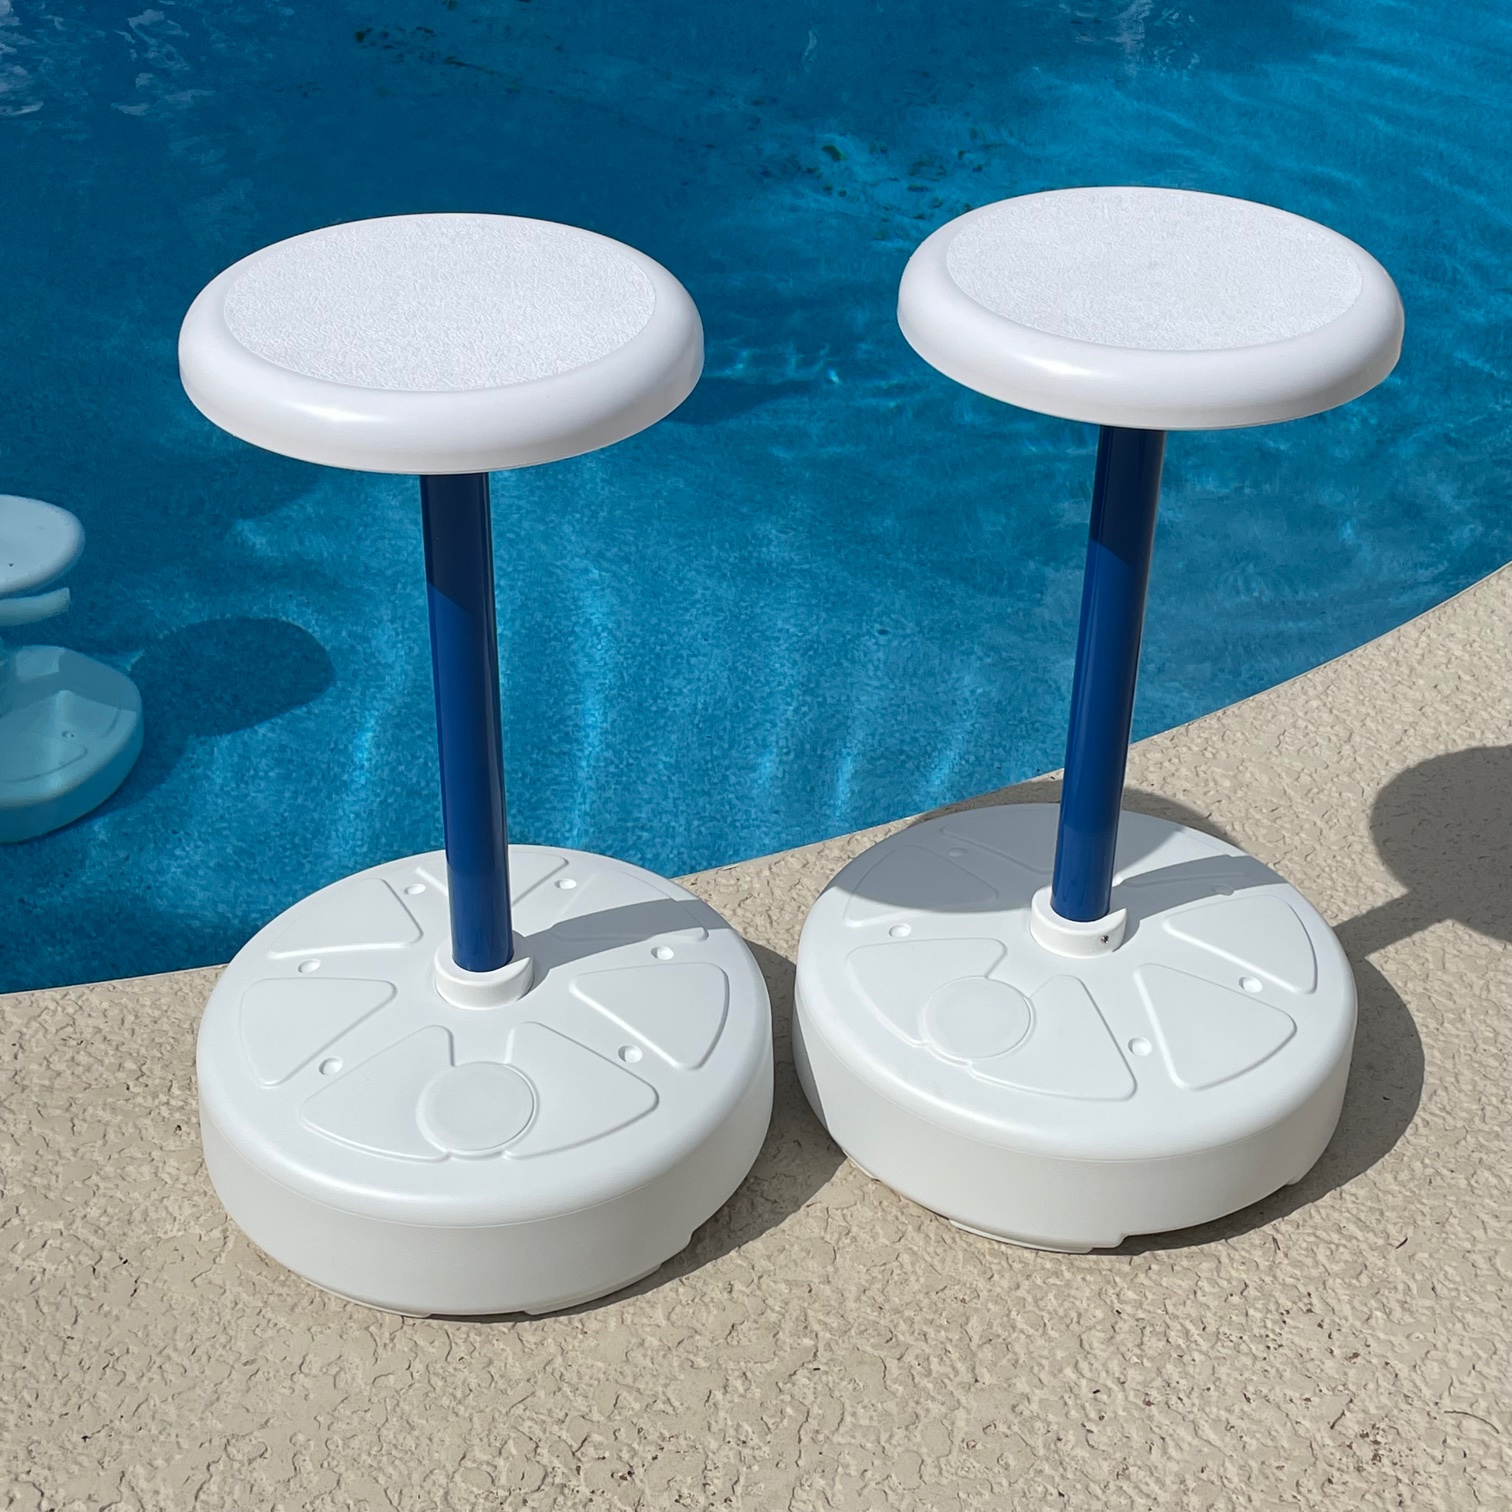 Relaxation Station Swimming Pool Stools, Swimming Pool Bar Stool Height